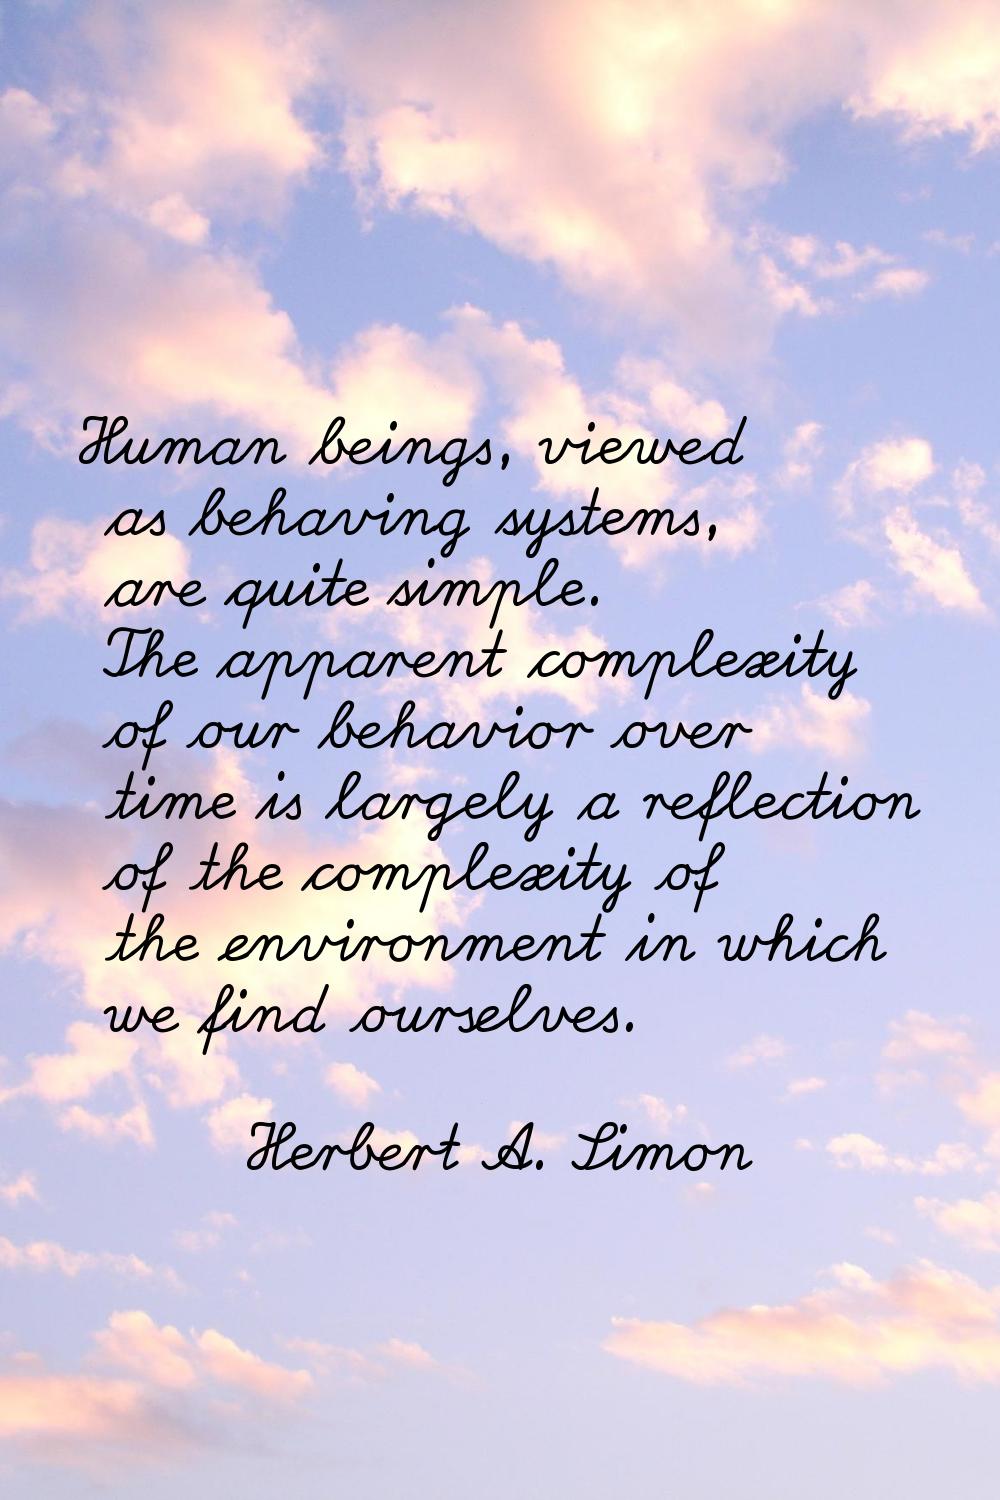 Human beings, viewed as behaving systems, are quite simple. The apparent complexity of our behavior